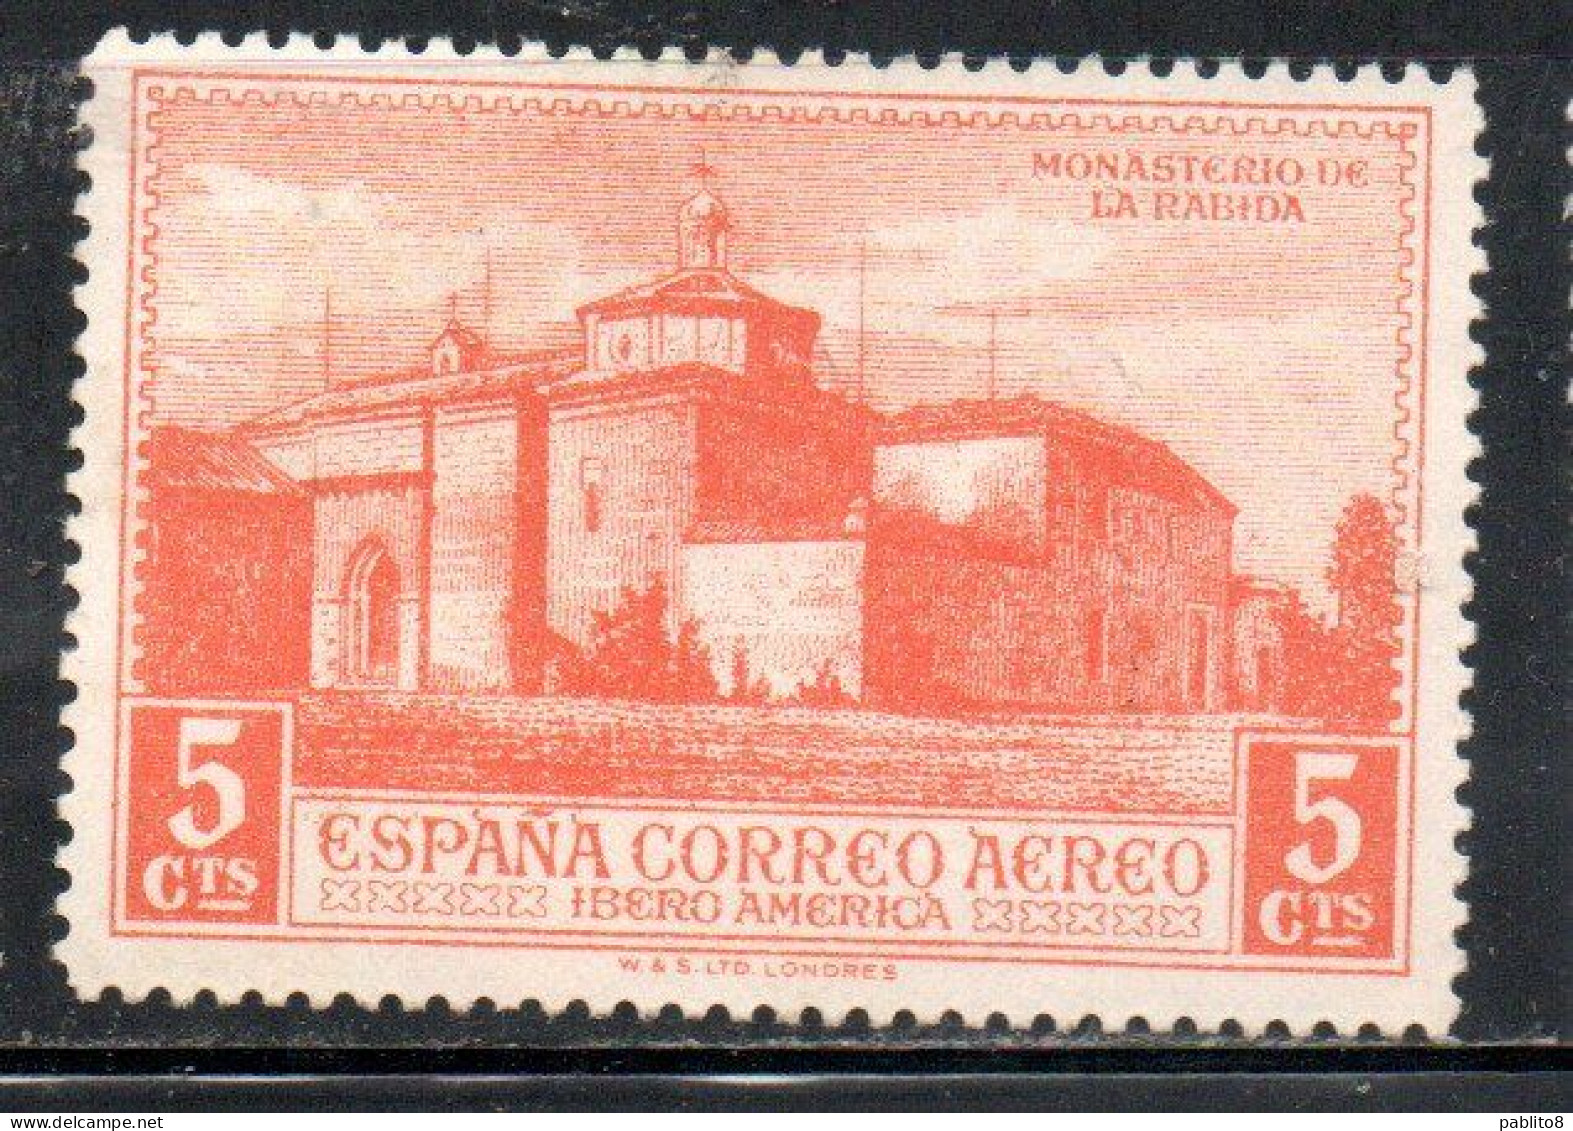 SPAIN ESPAÑA SPAGNA 1930 AIR POST MAIL AIRMAIL CHRISTOPHER COLUMBUS ISSUE LA RABYDA MONASTER  5c MLH - Unused Stamps